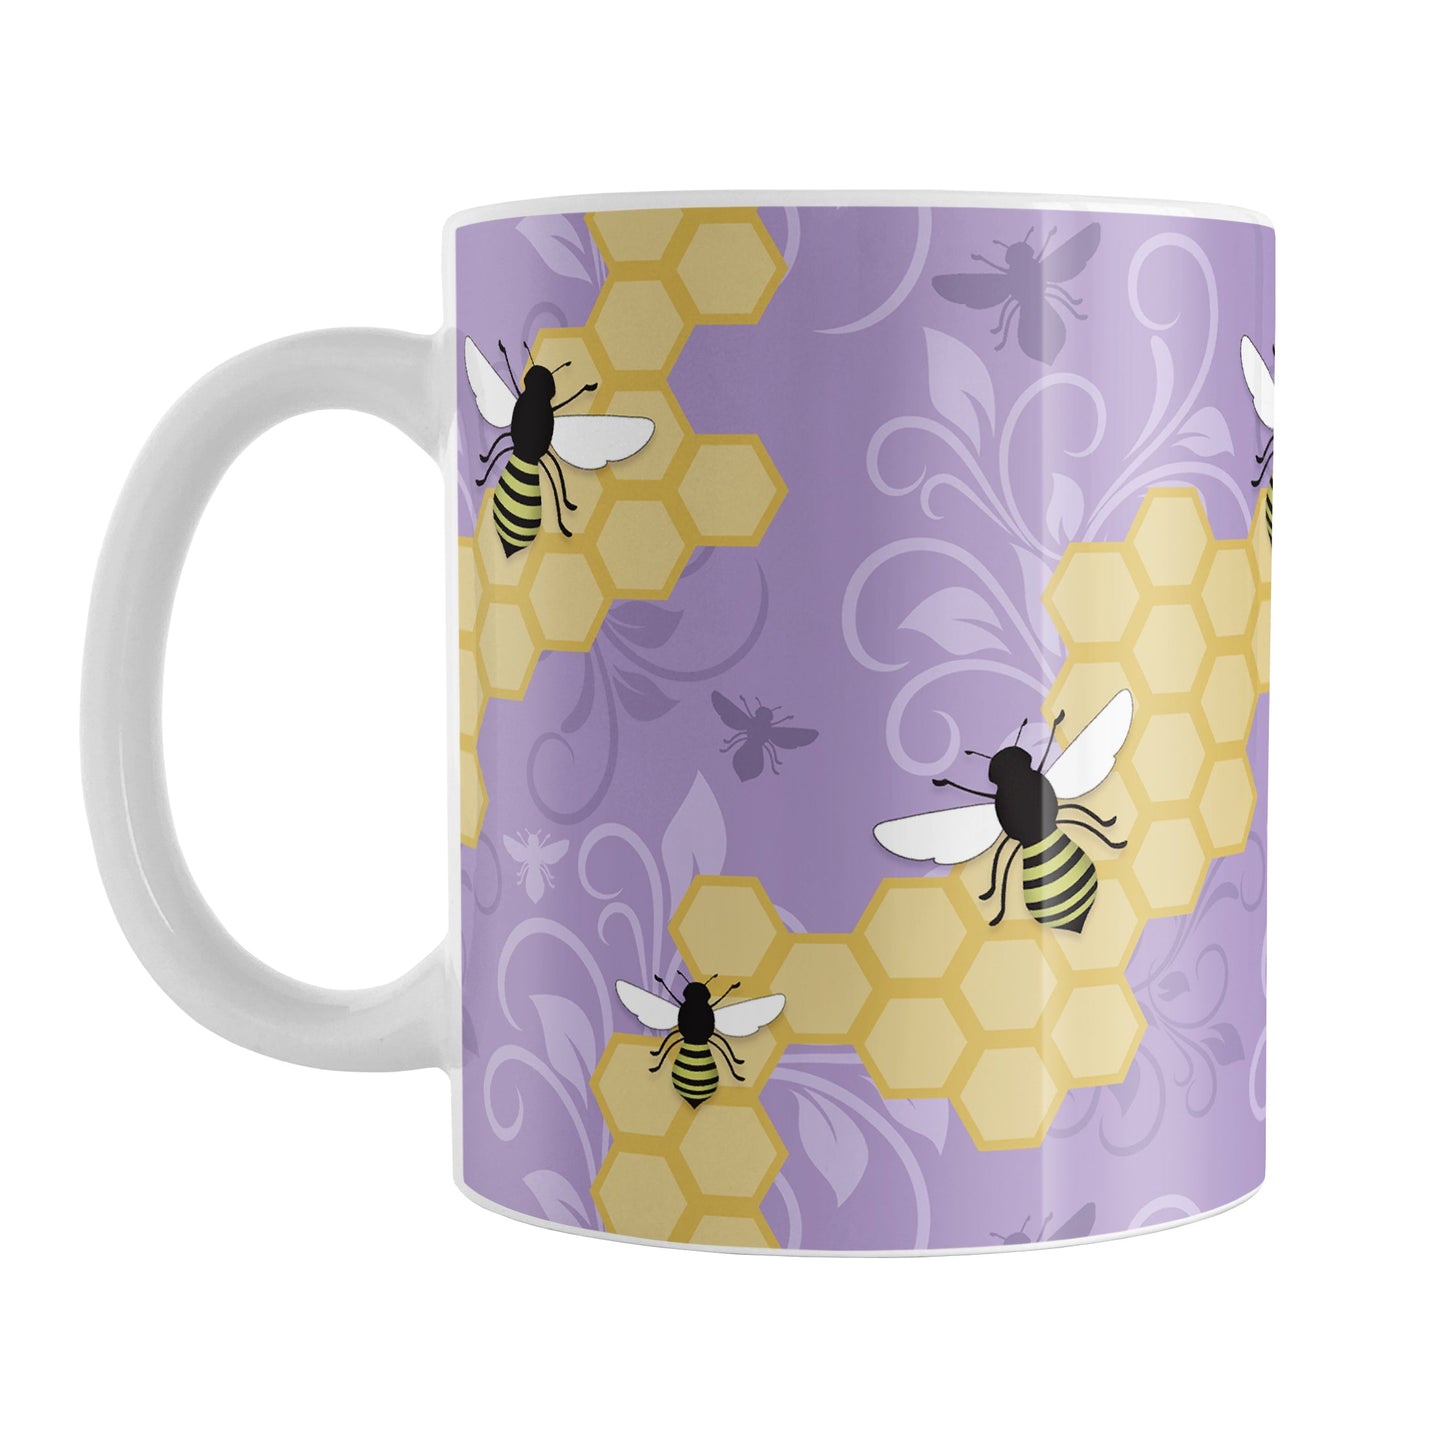 Purple Honeycomb Bee Mug (11oz) at Amy's Coffee Mugs. A ceramic coffee mug designed with a pattern of black and yellow bees on honeycomb lines over a purple flourish background that wraps around the mug to the handle.